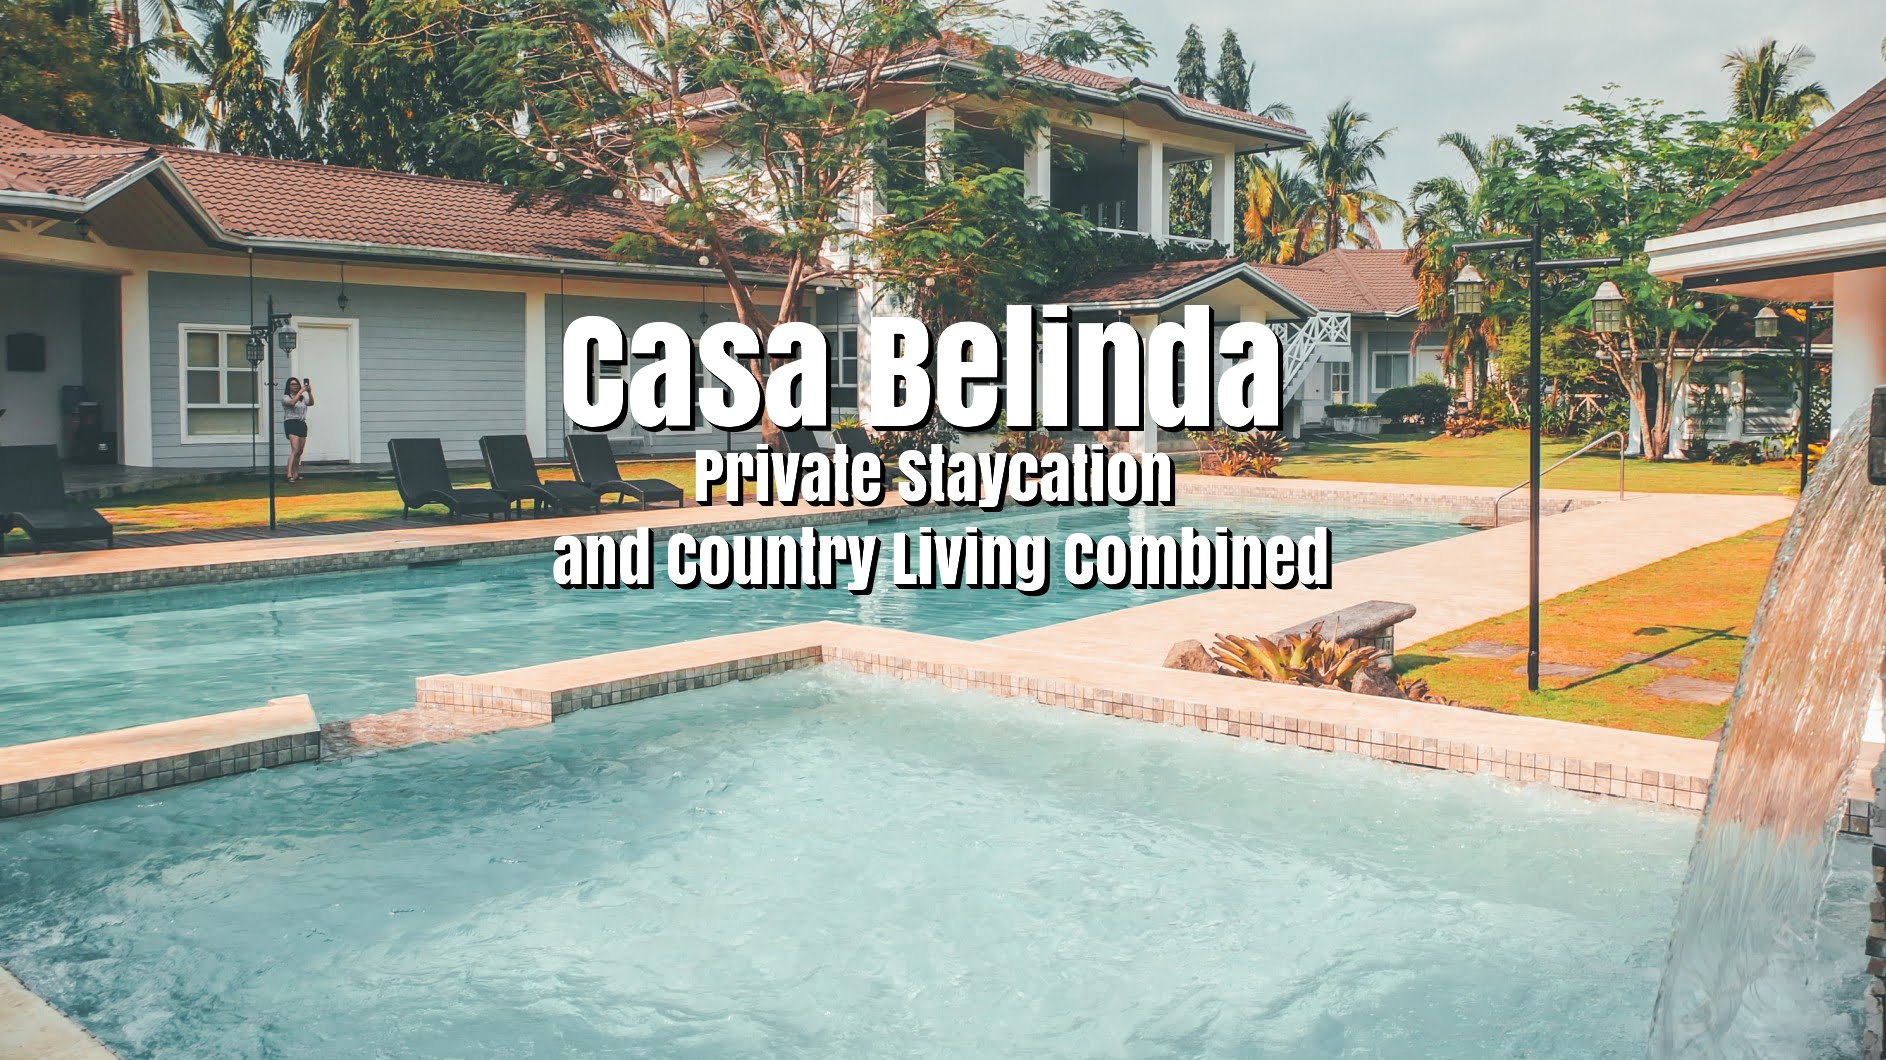 Casa Belinda (Lipa, Batangas) | Private Staycation and Country Living Combined